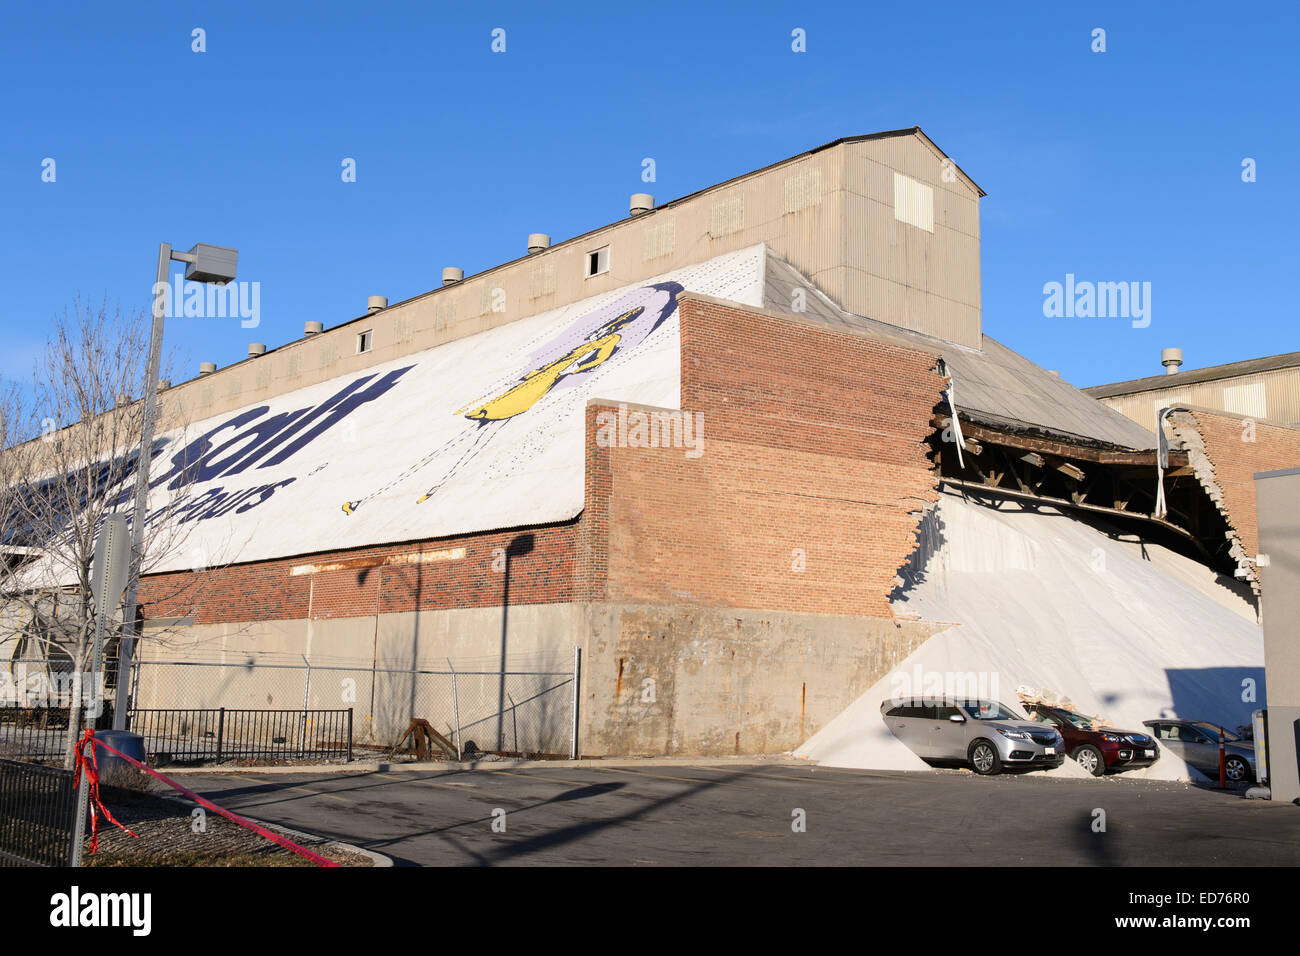 Chicago, Illinois, USA. 30th December, 2014. A wall of a Morton Salt building collapses and spills salt out onto vehicles parked at an Acura dealership in Chicago, IL, on Tuesday December 30, 2014. Credit:  Daniel Boczarski/Alamy Live News Stock Photo